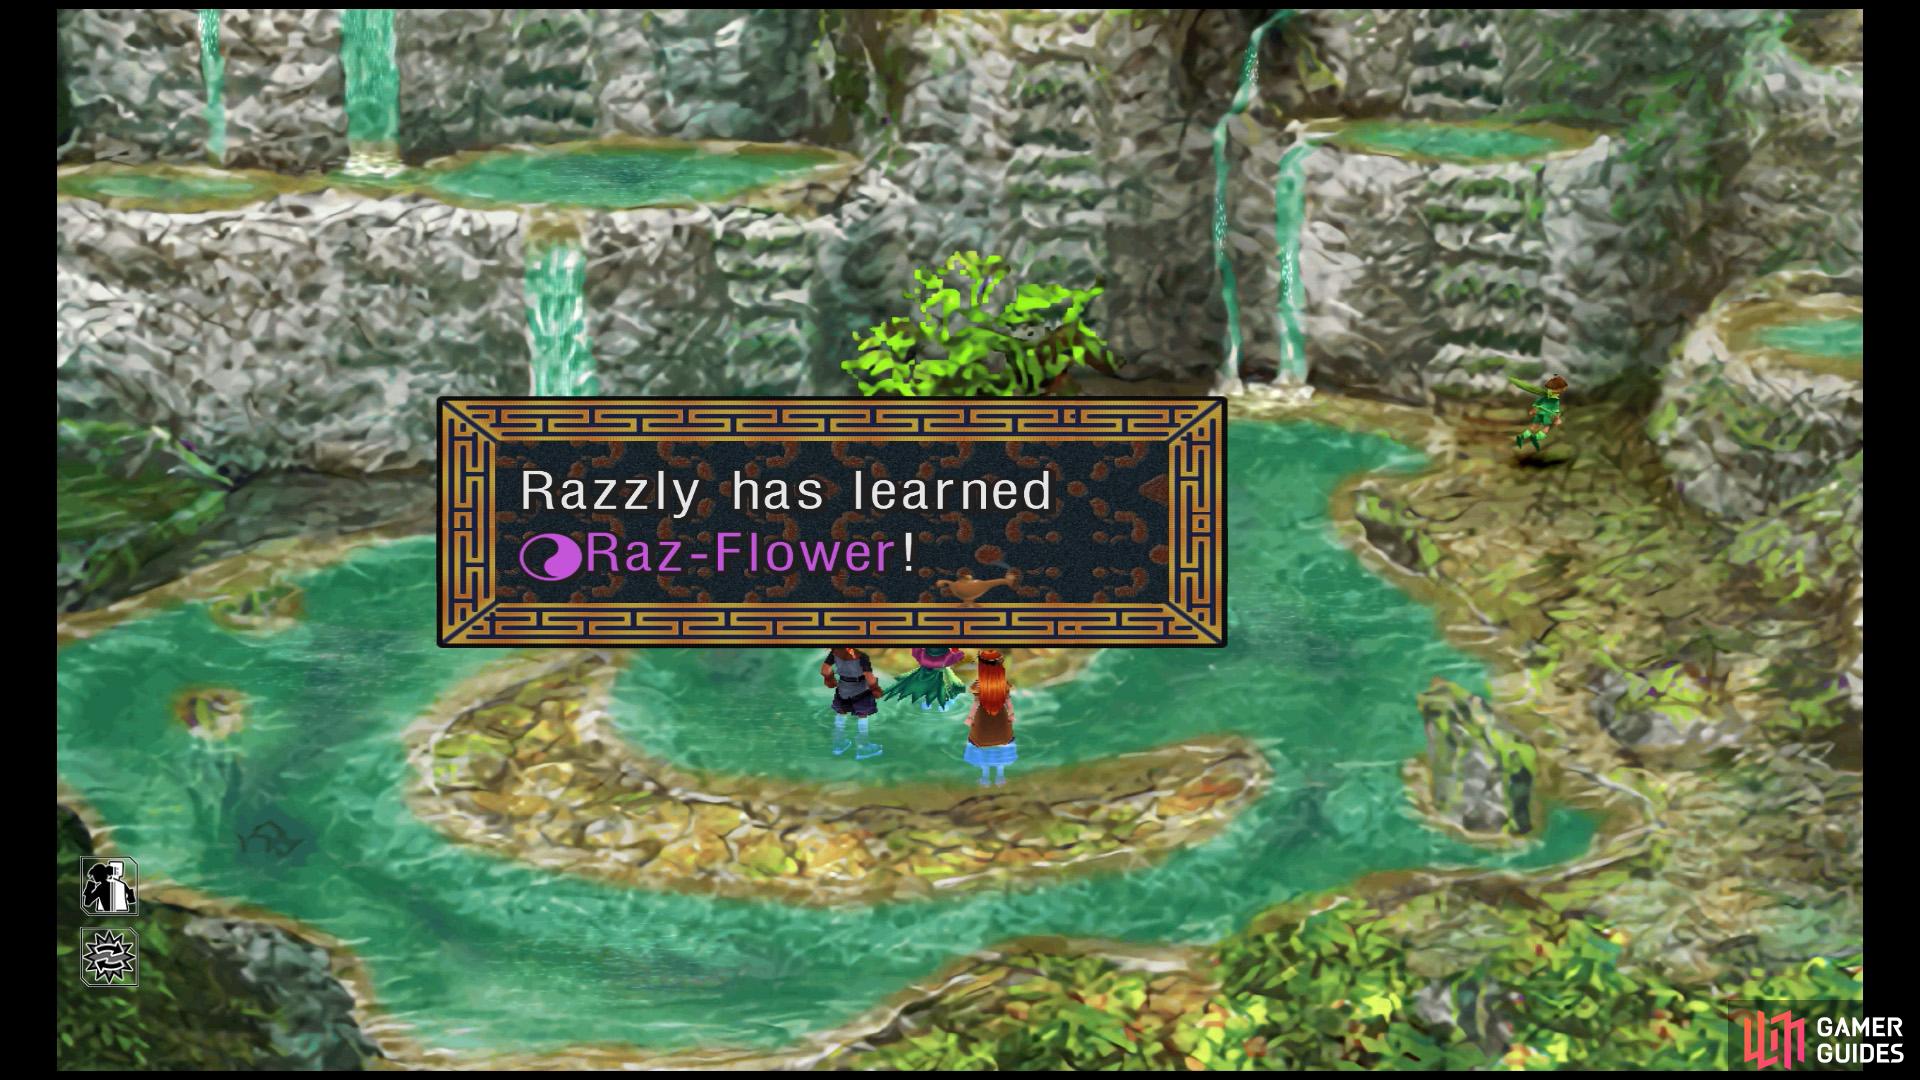 Later, after Serge returns to normal, visit Water Dragon Isle with Razzly.